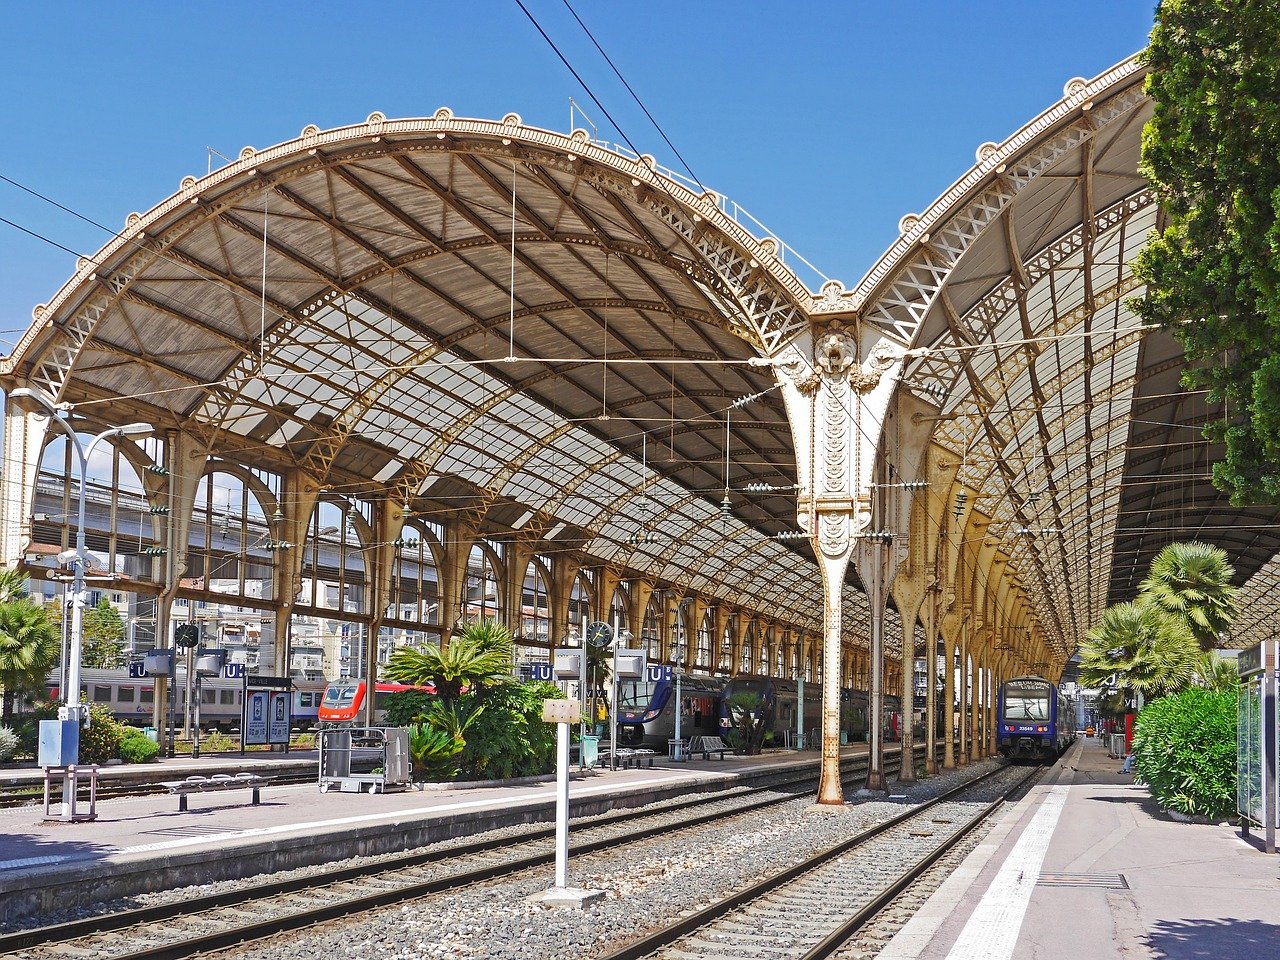 How To Get from Beauvais Airport to Gare de Lyon